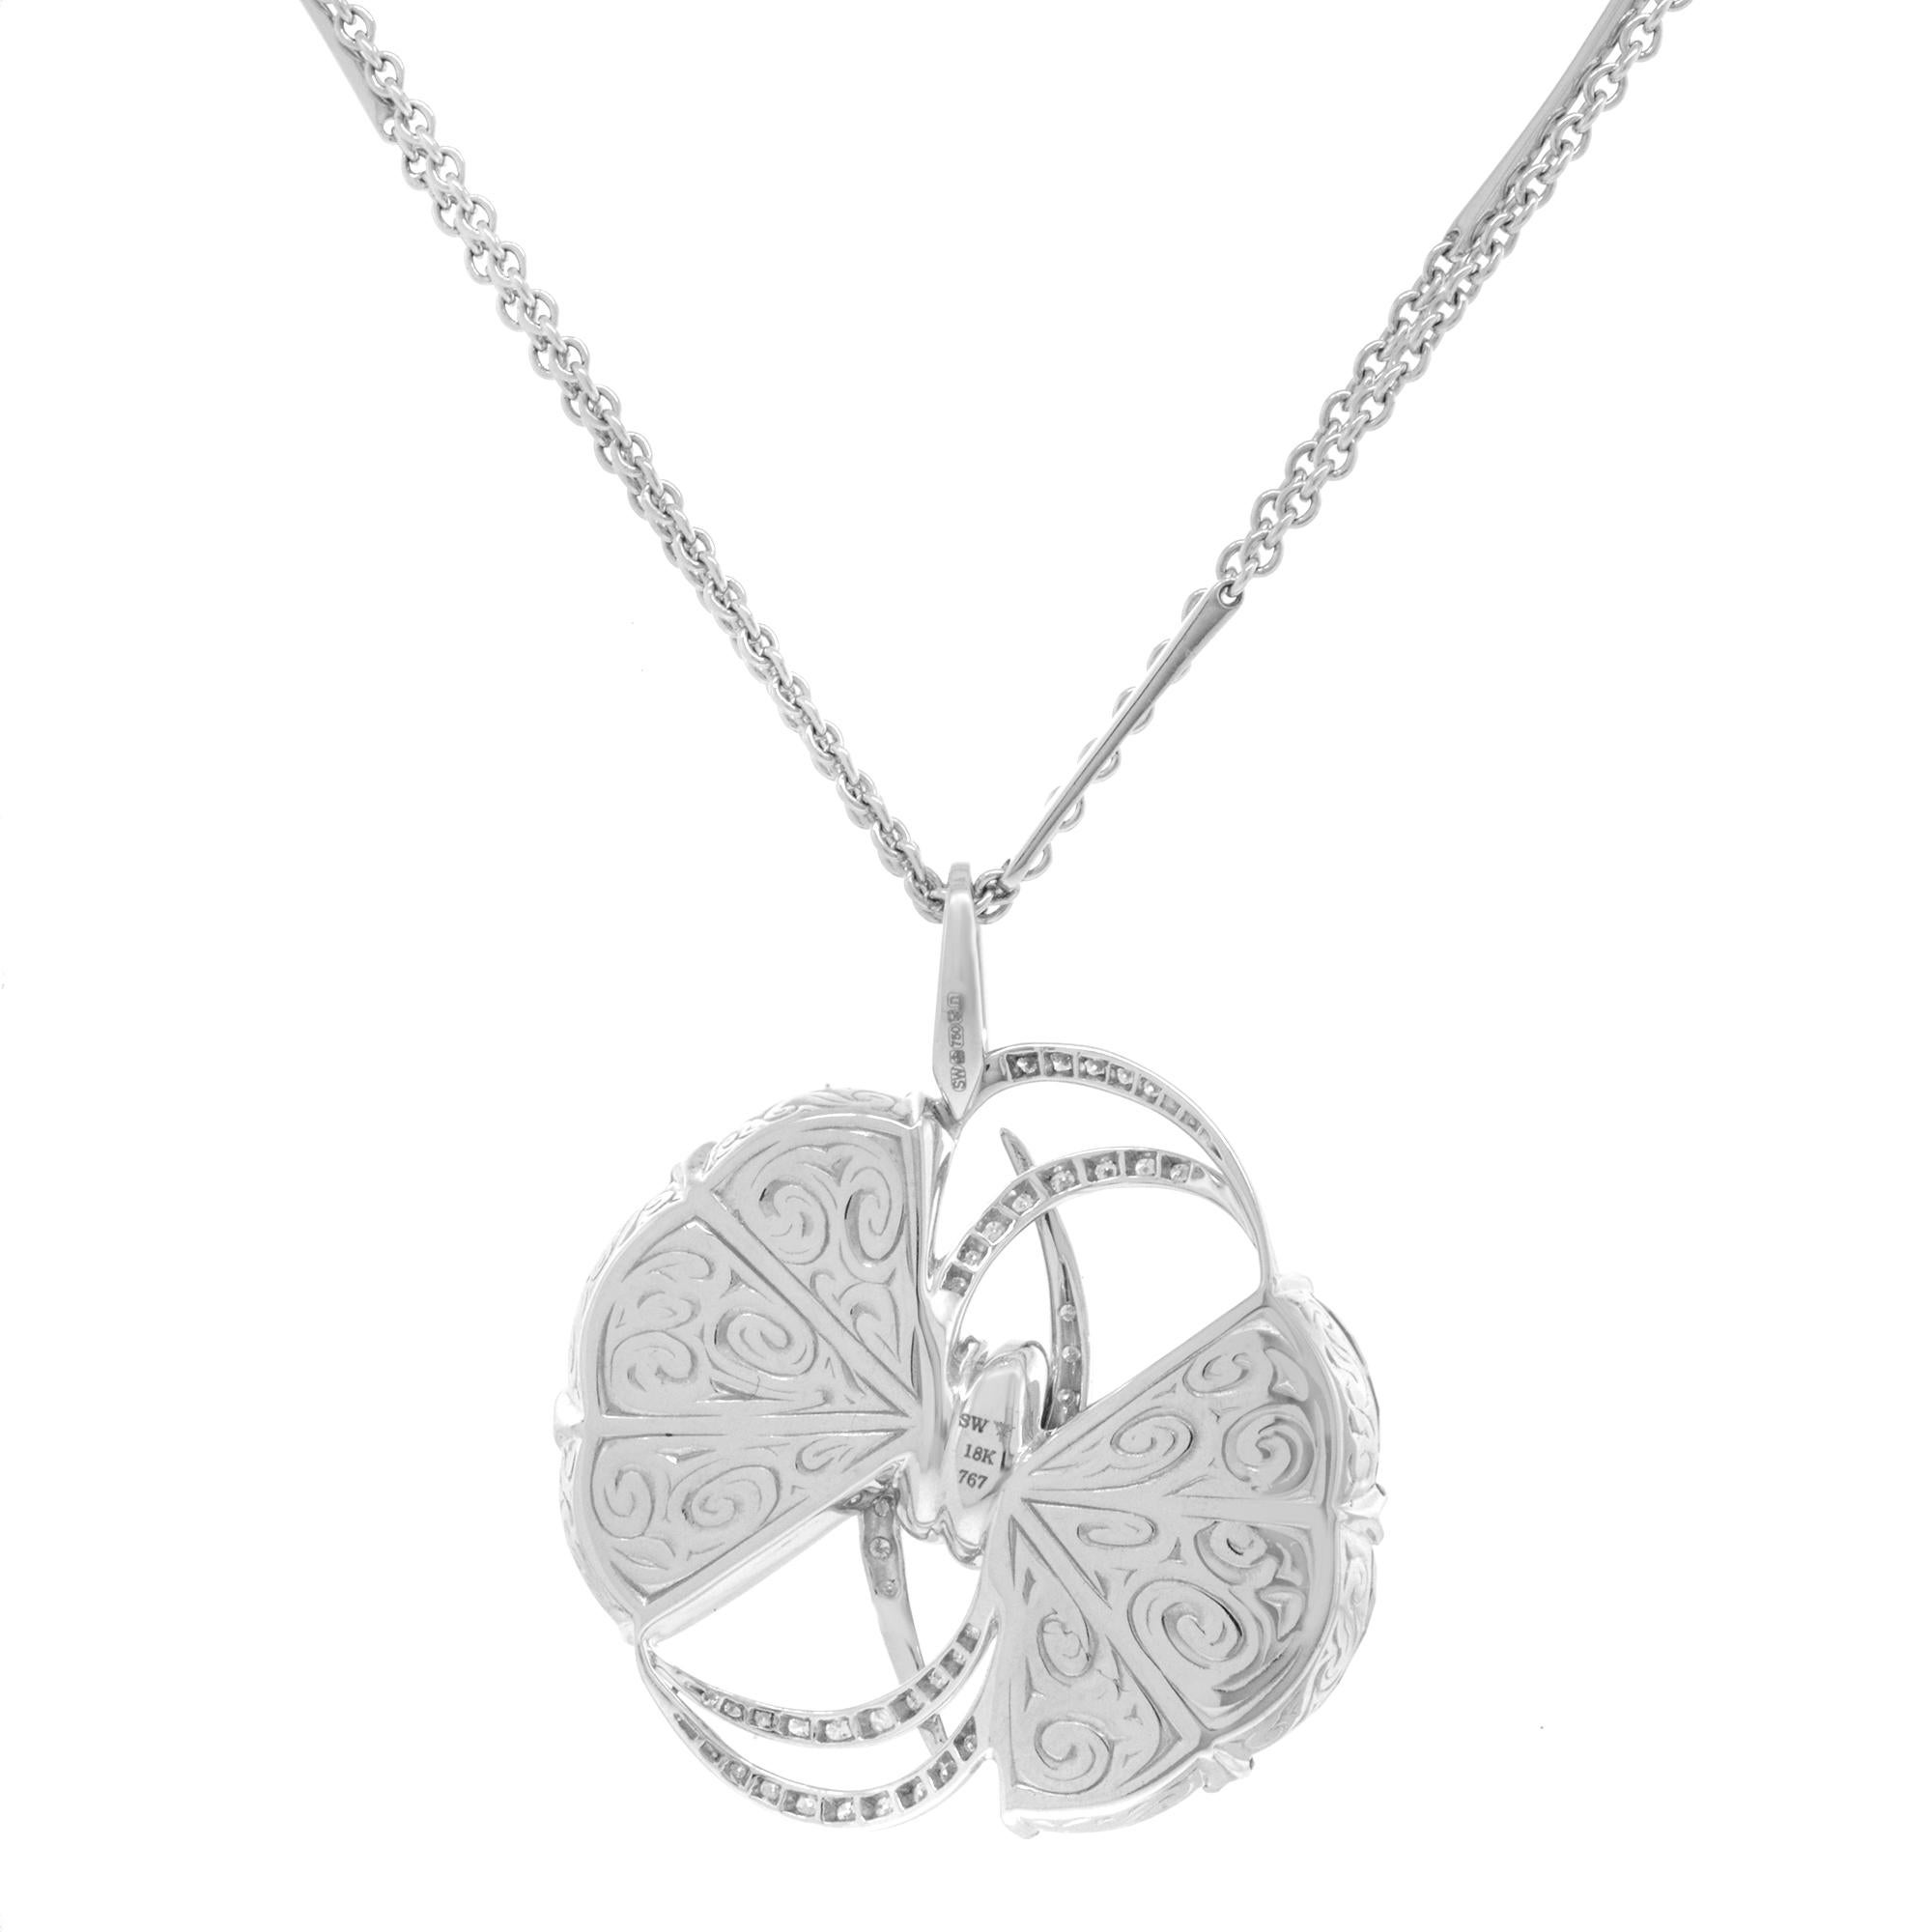 A remarkable constellation of gems and diamonds in this original Forget Me Knot design from Stephen Webster. It features a double chain with connection bars. Necklace length: 18 inches, can be worn alone or beautified with a signature pendant.